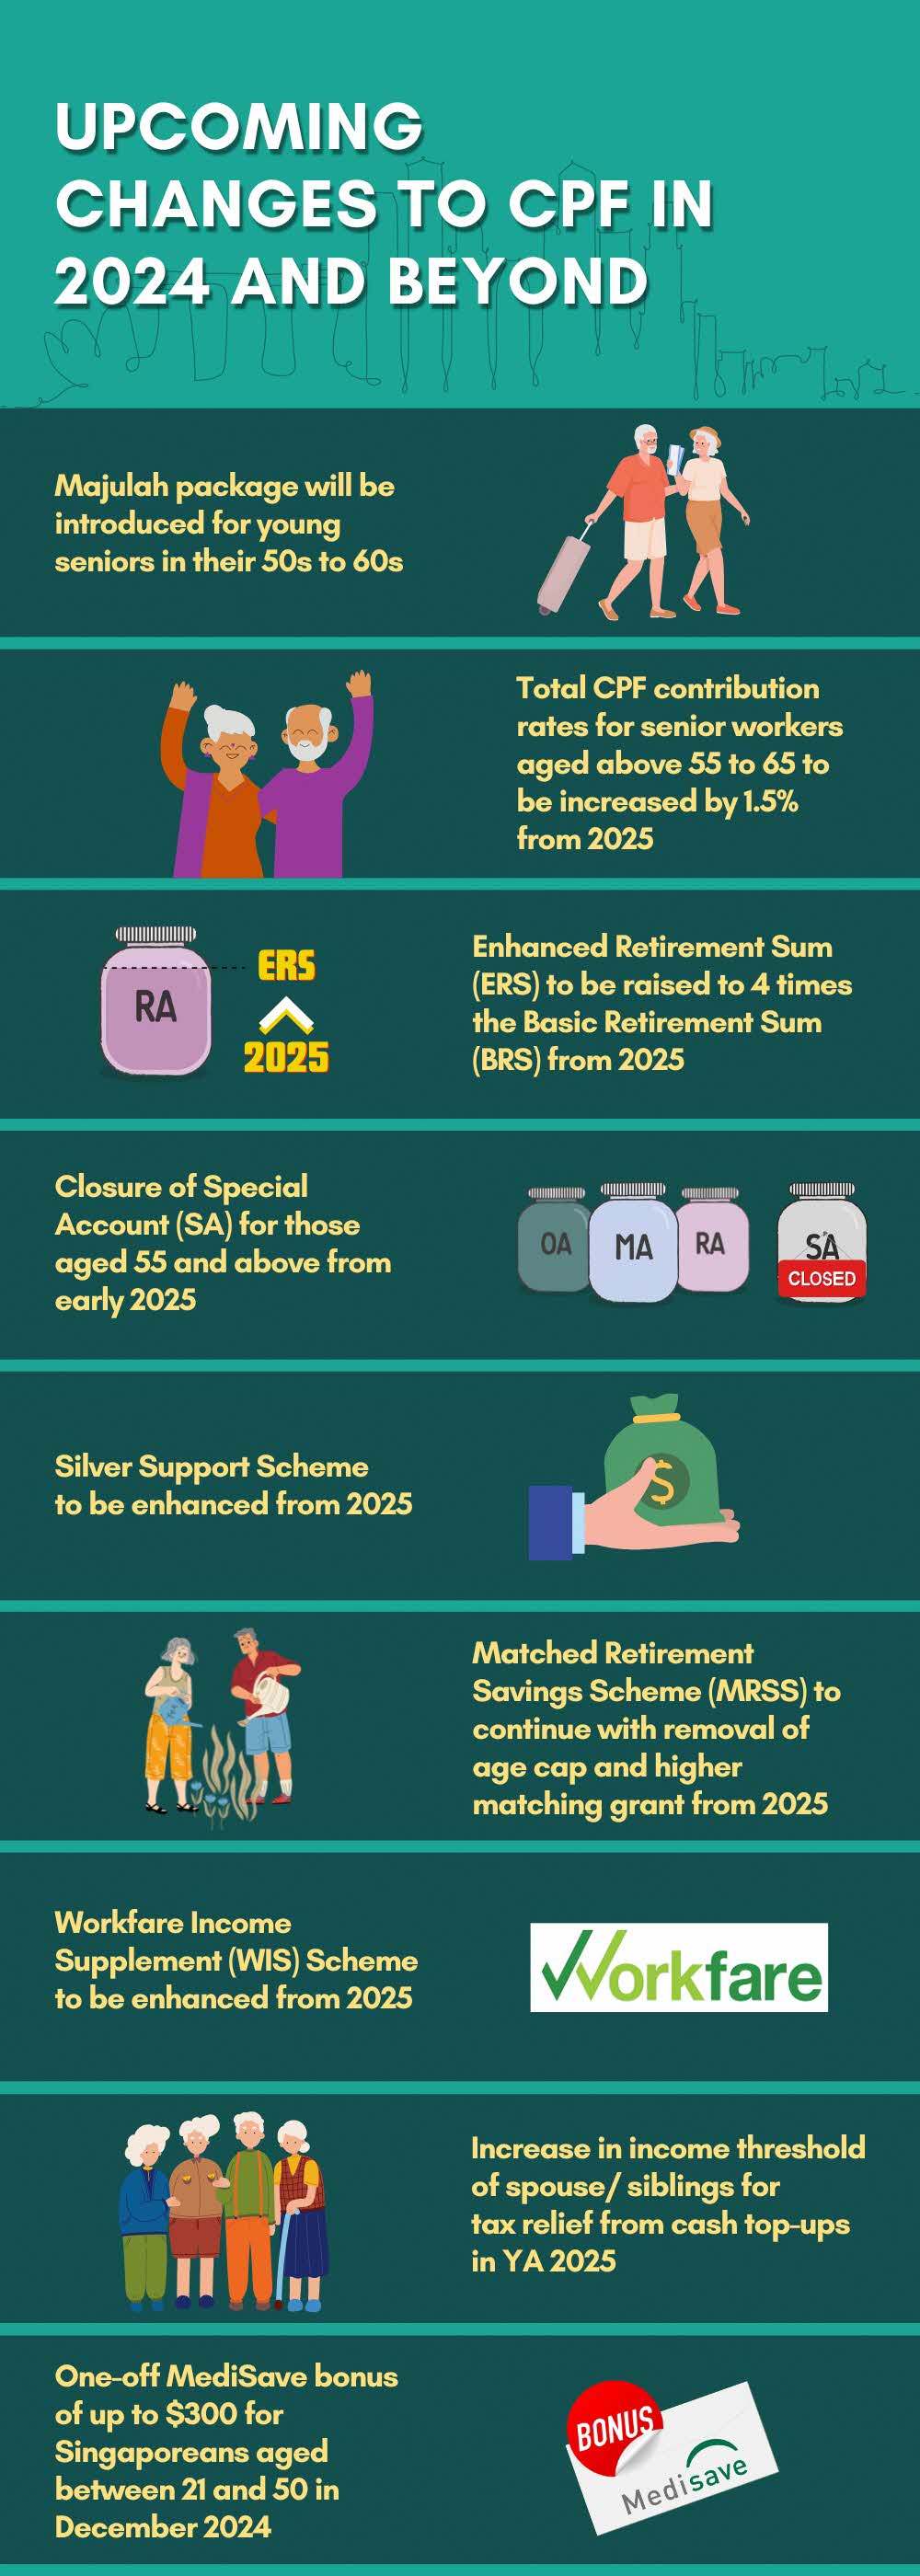 Changes to CPF in 2024 and beyond